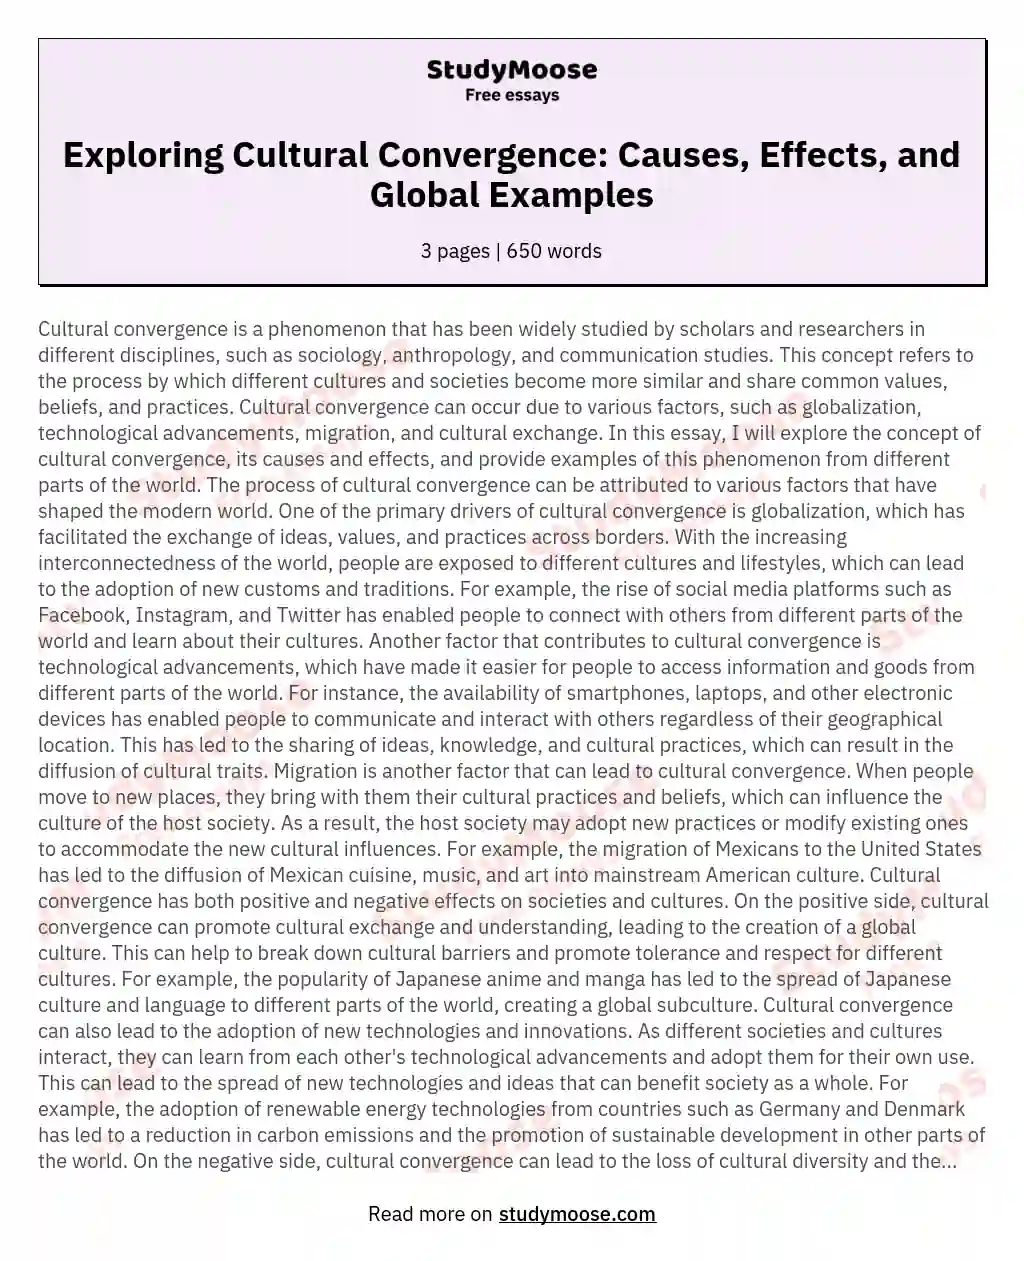 Exploring Cultural Convergence: Causes, Effects, and Global Examples essay